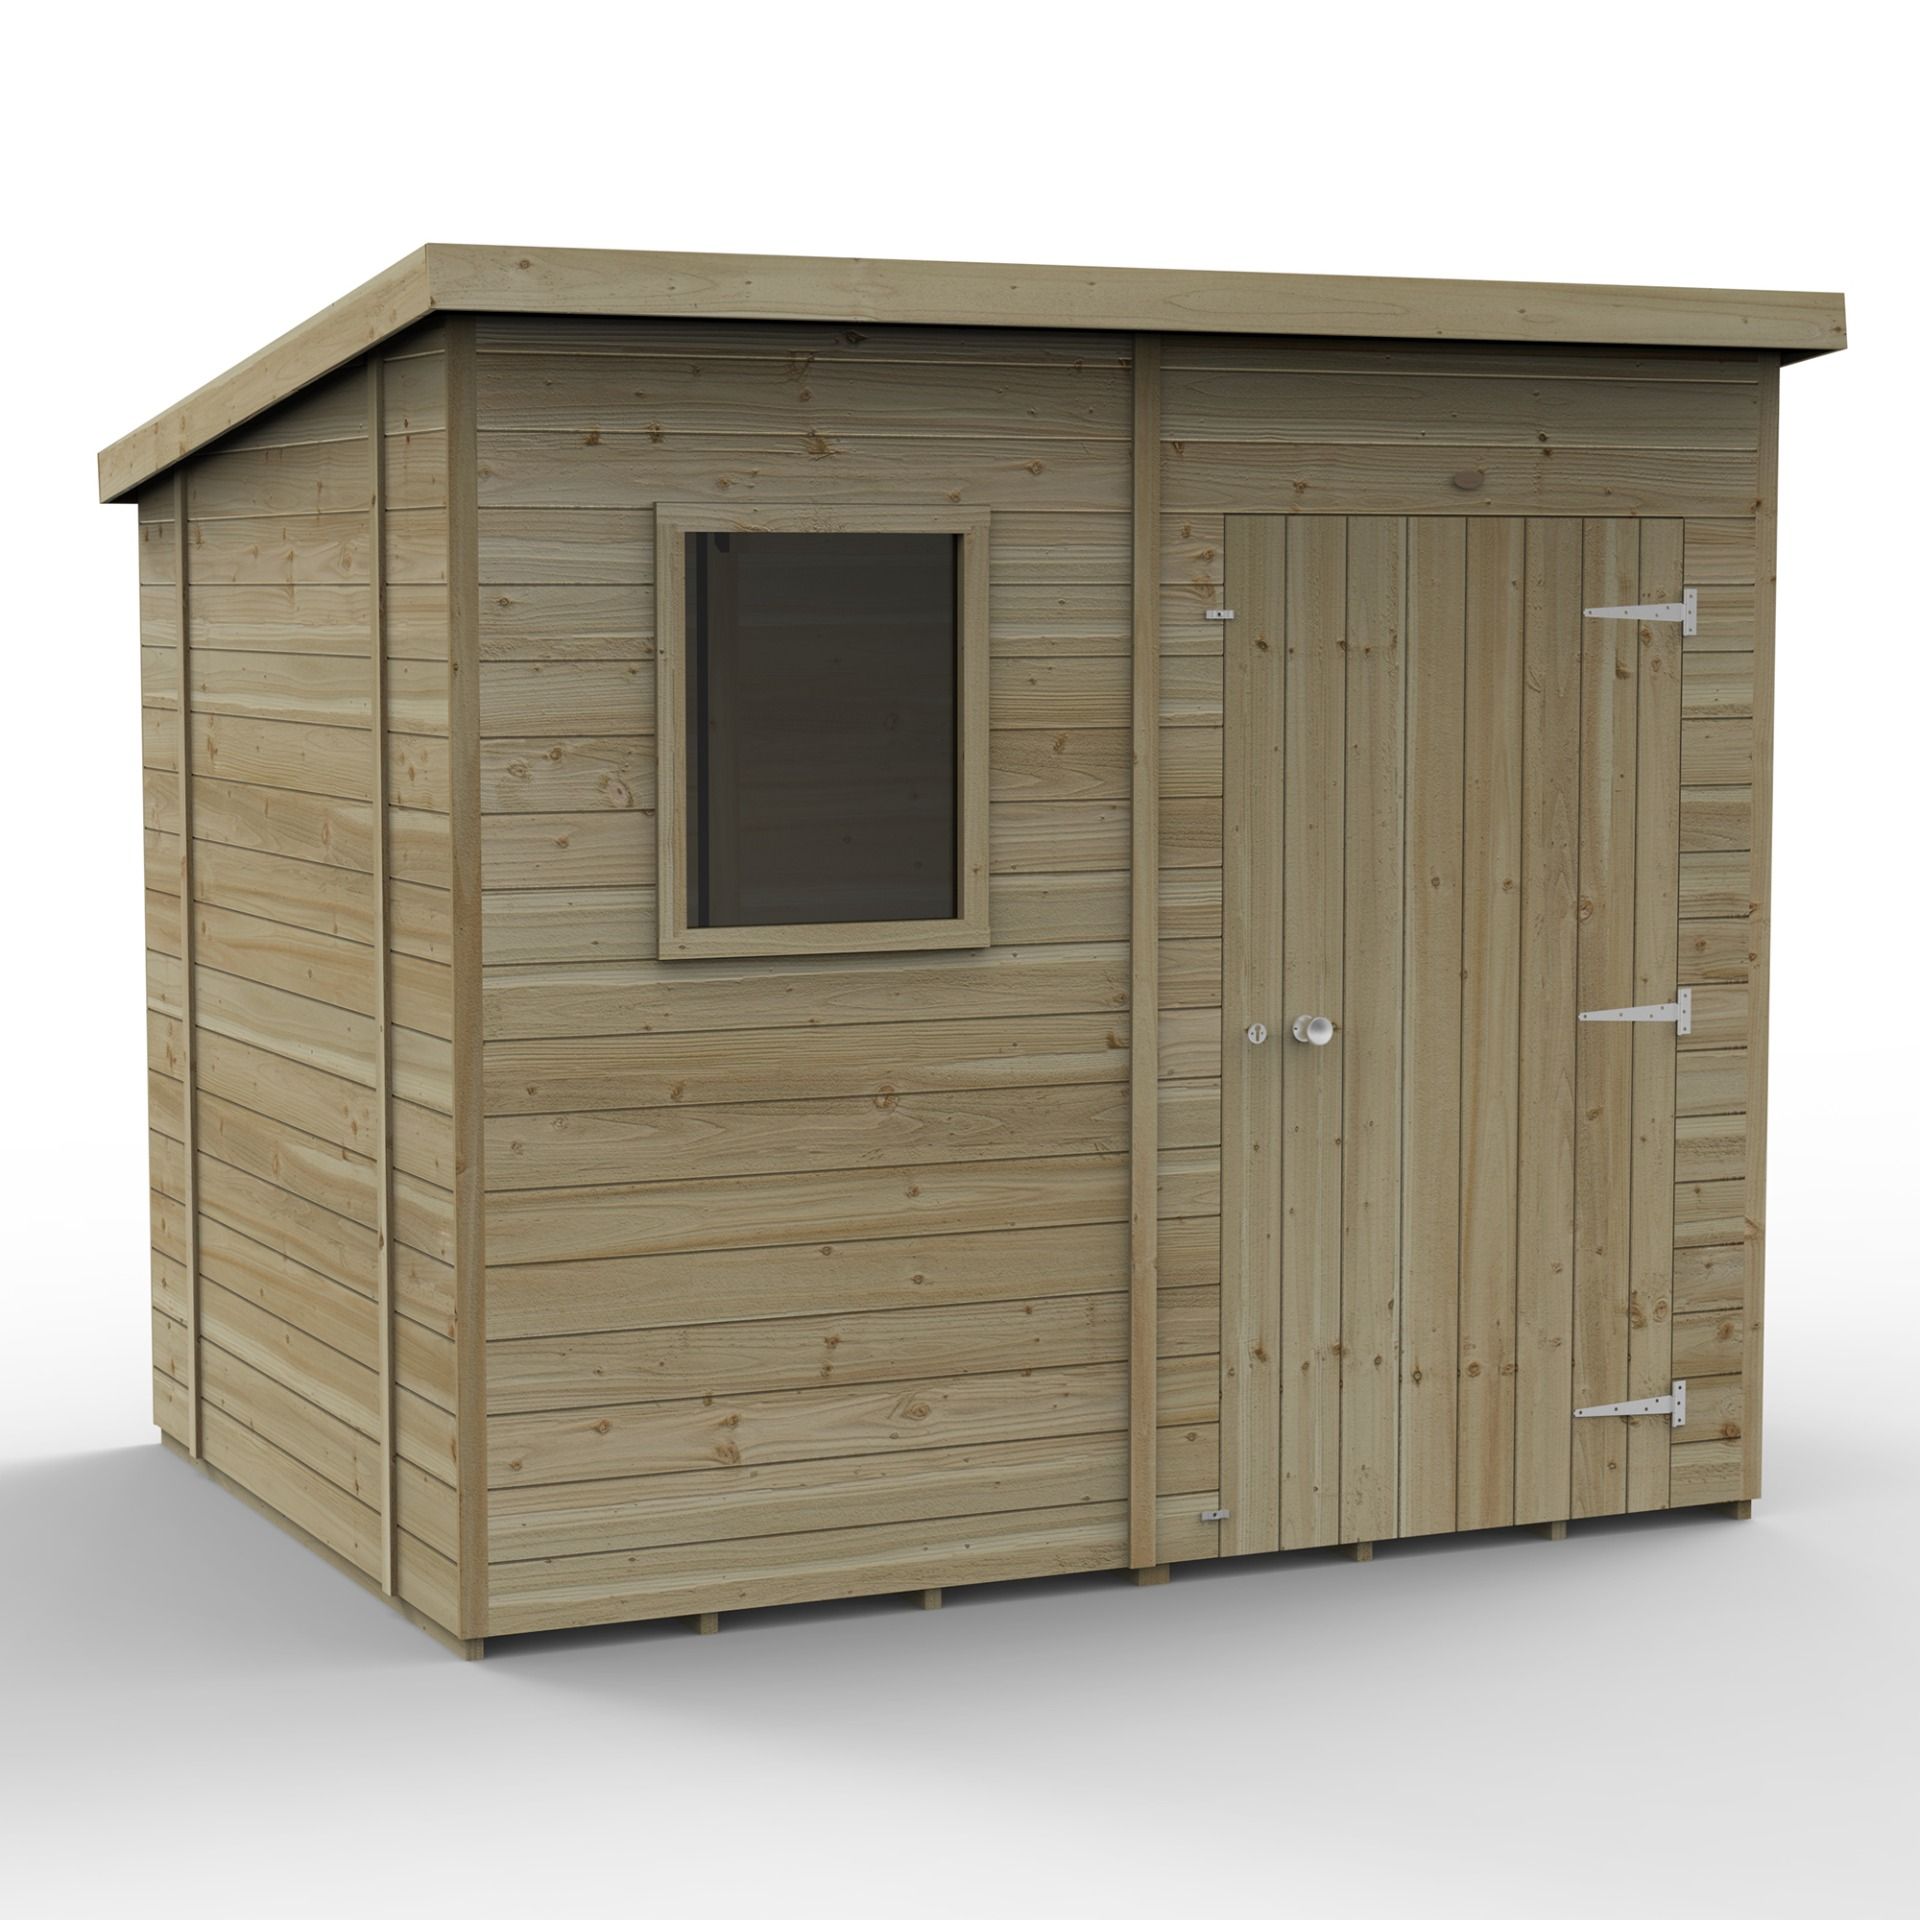 Forest Garden Tongue & Groove Pent Shed - 8' x 6'